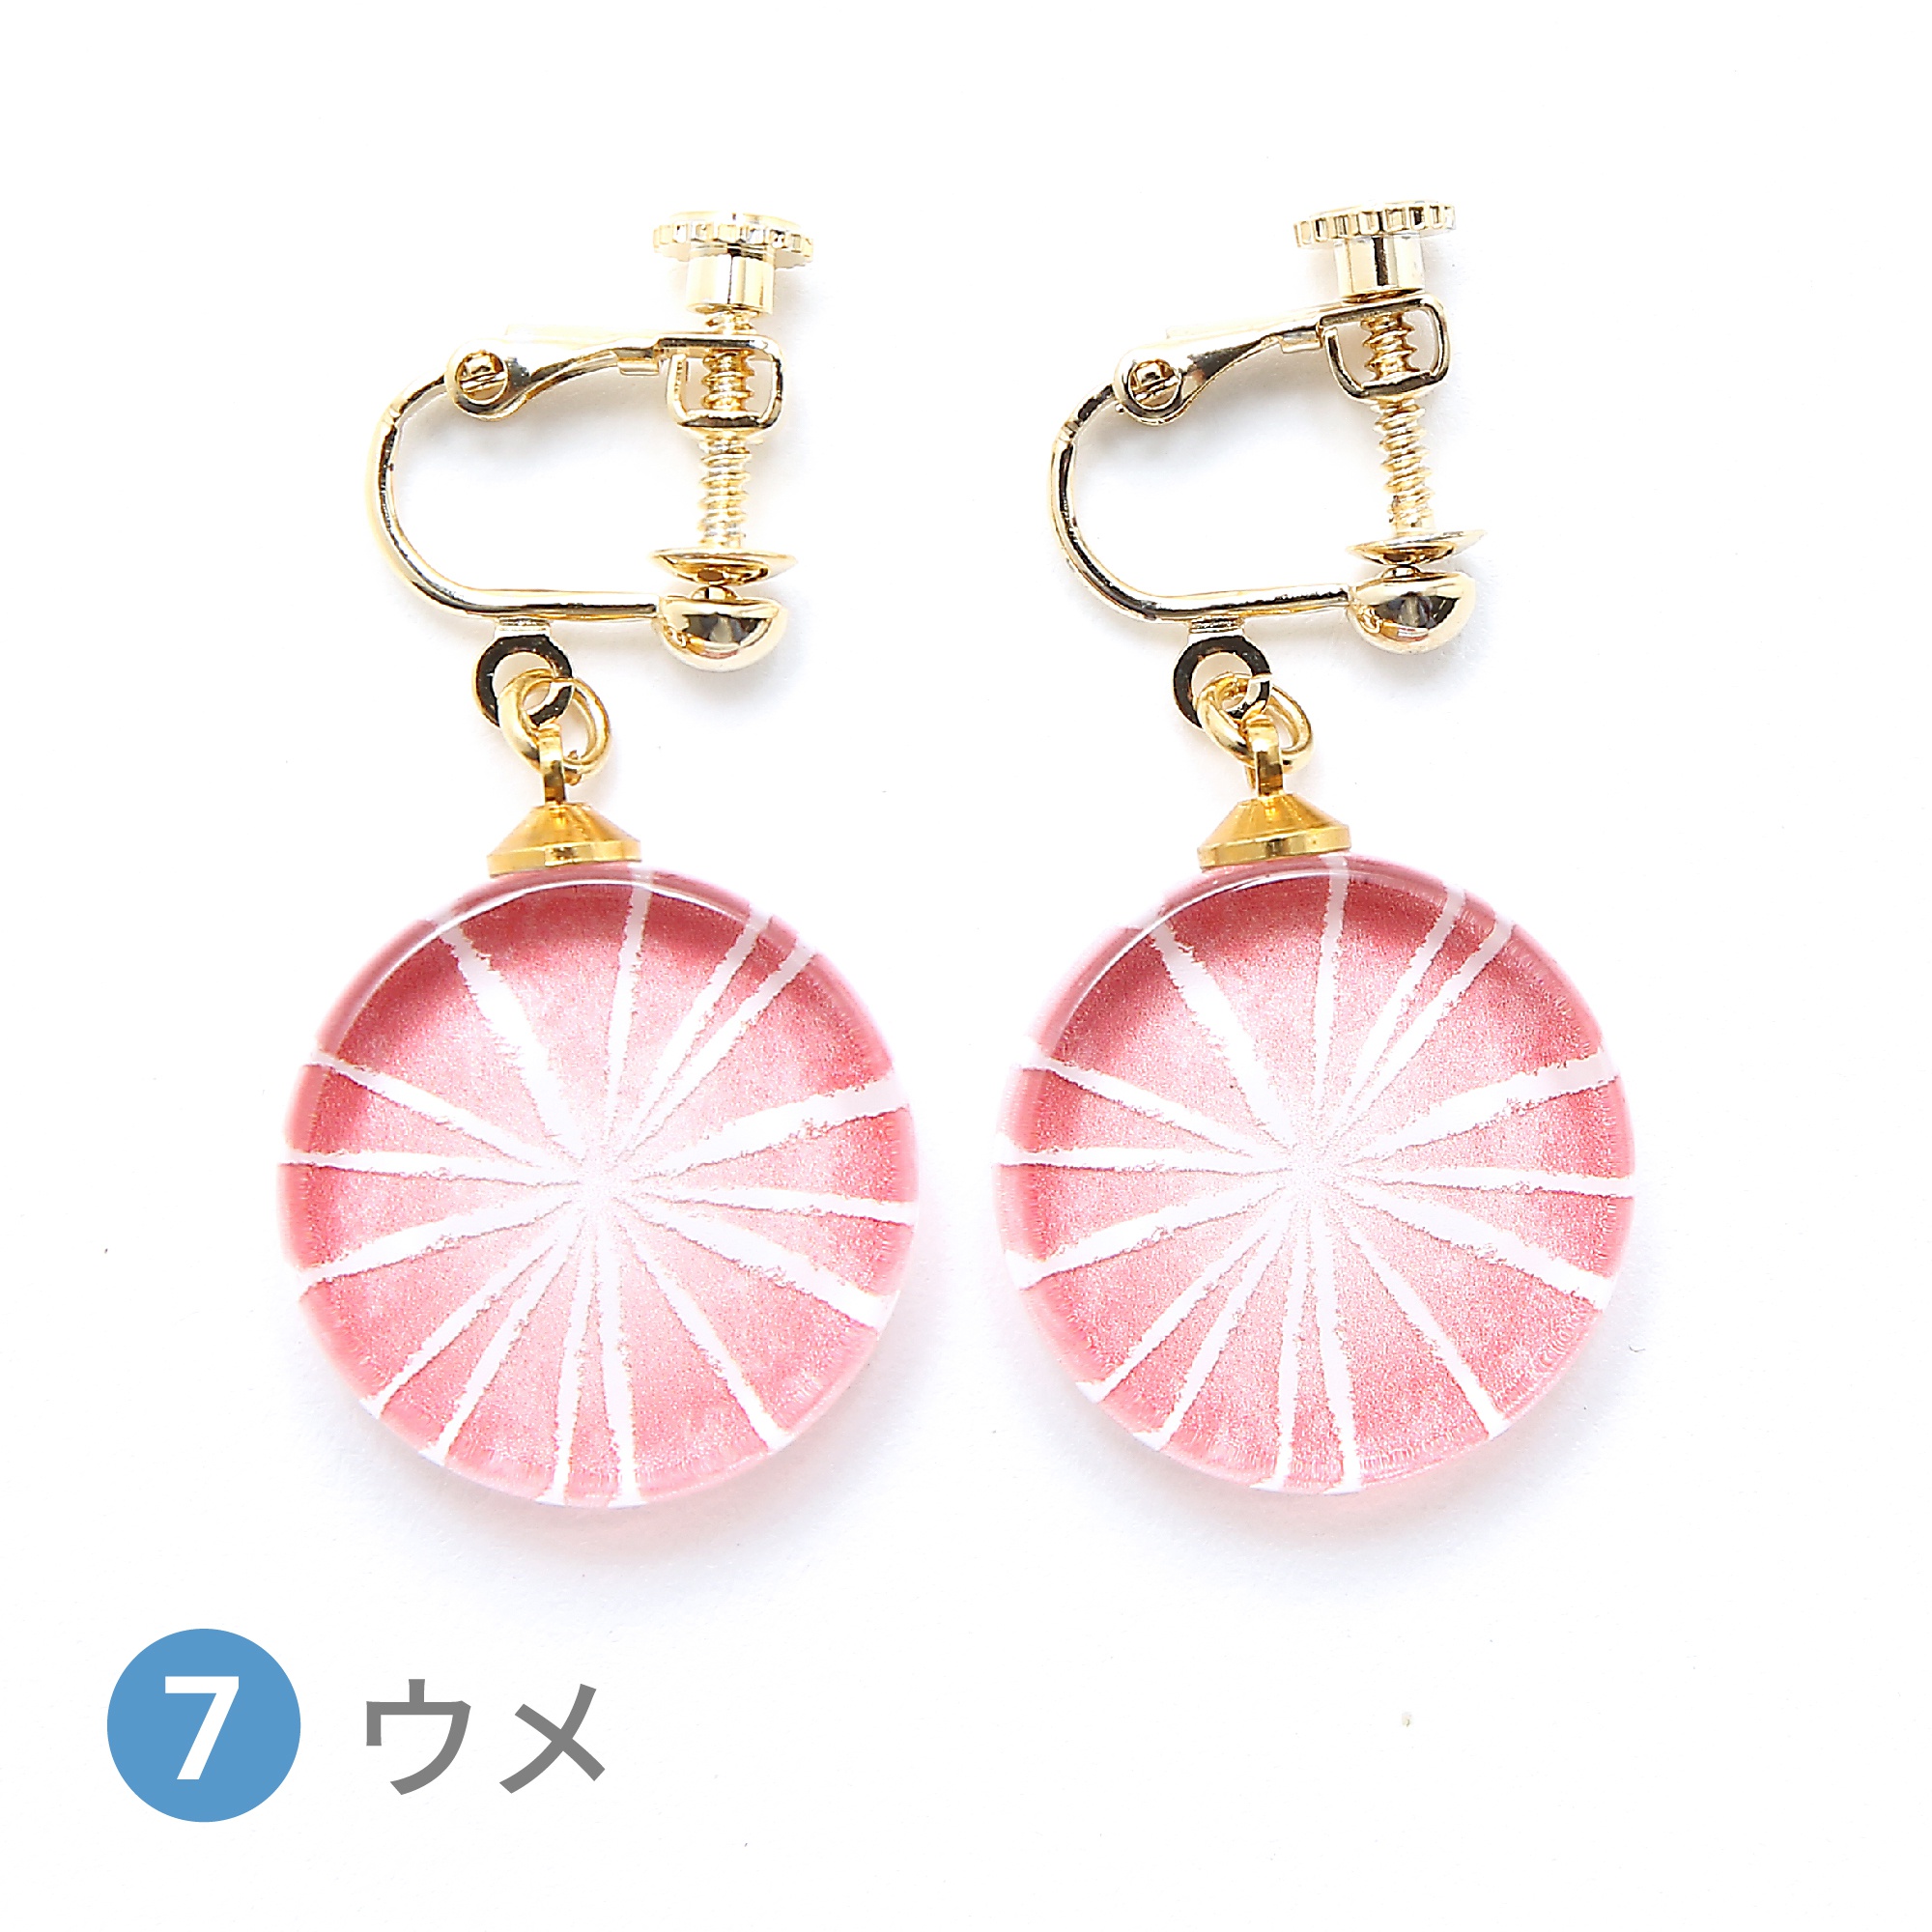 Glass accessories Earring candy Japanese apricot round shape